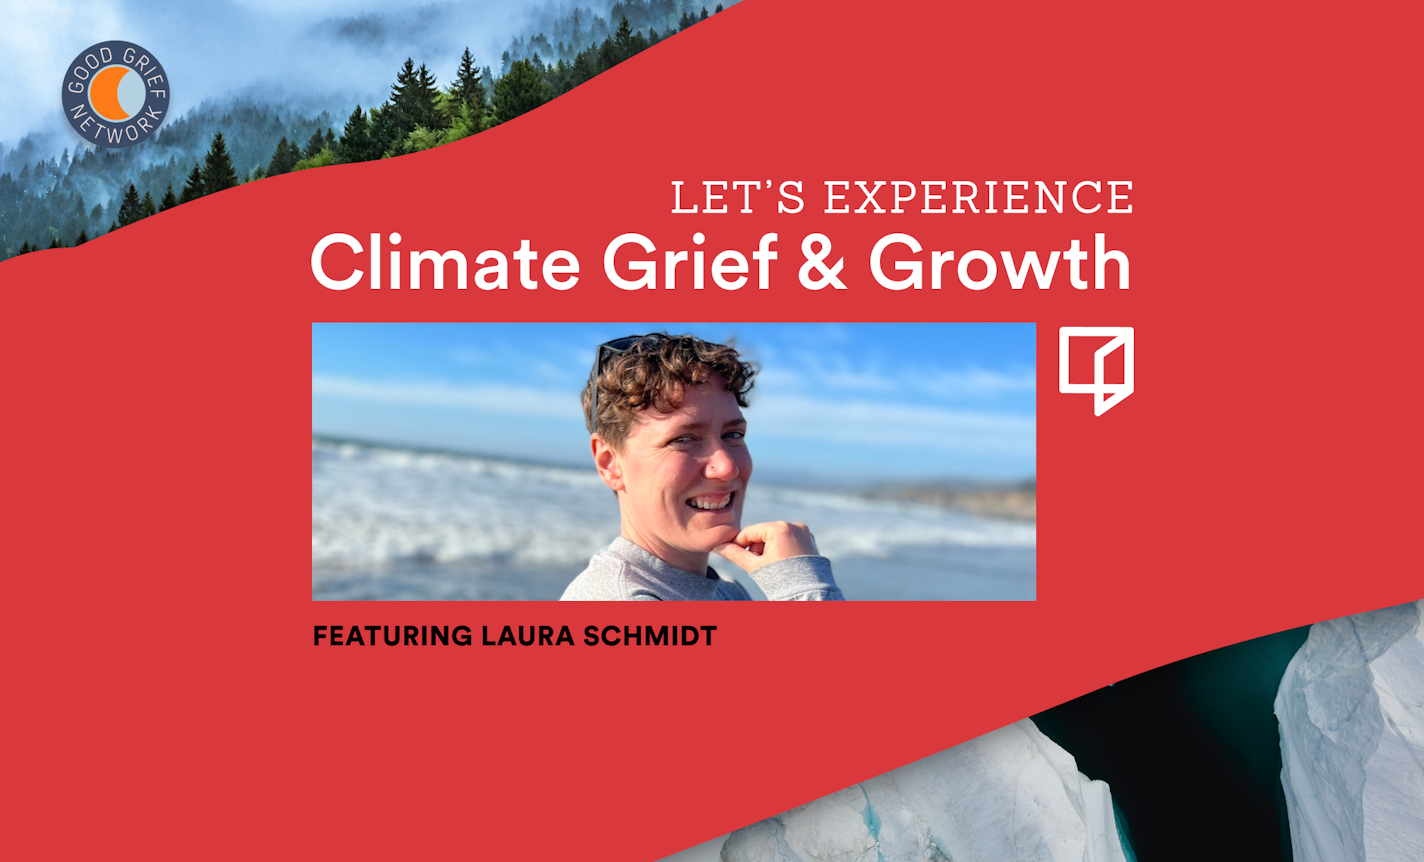 Let's EXPERIENCE: A Workshop to Process Climate Grief